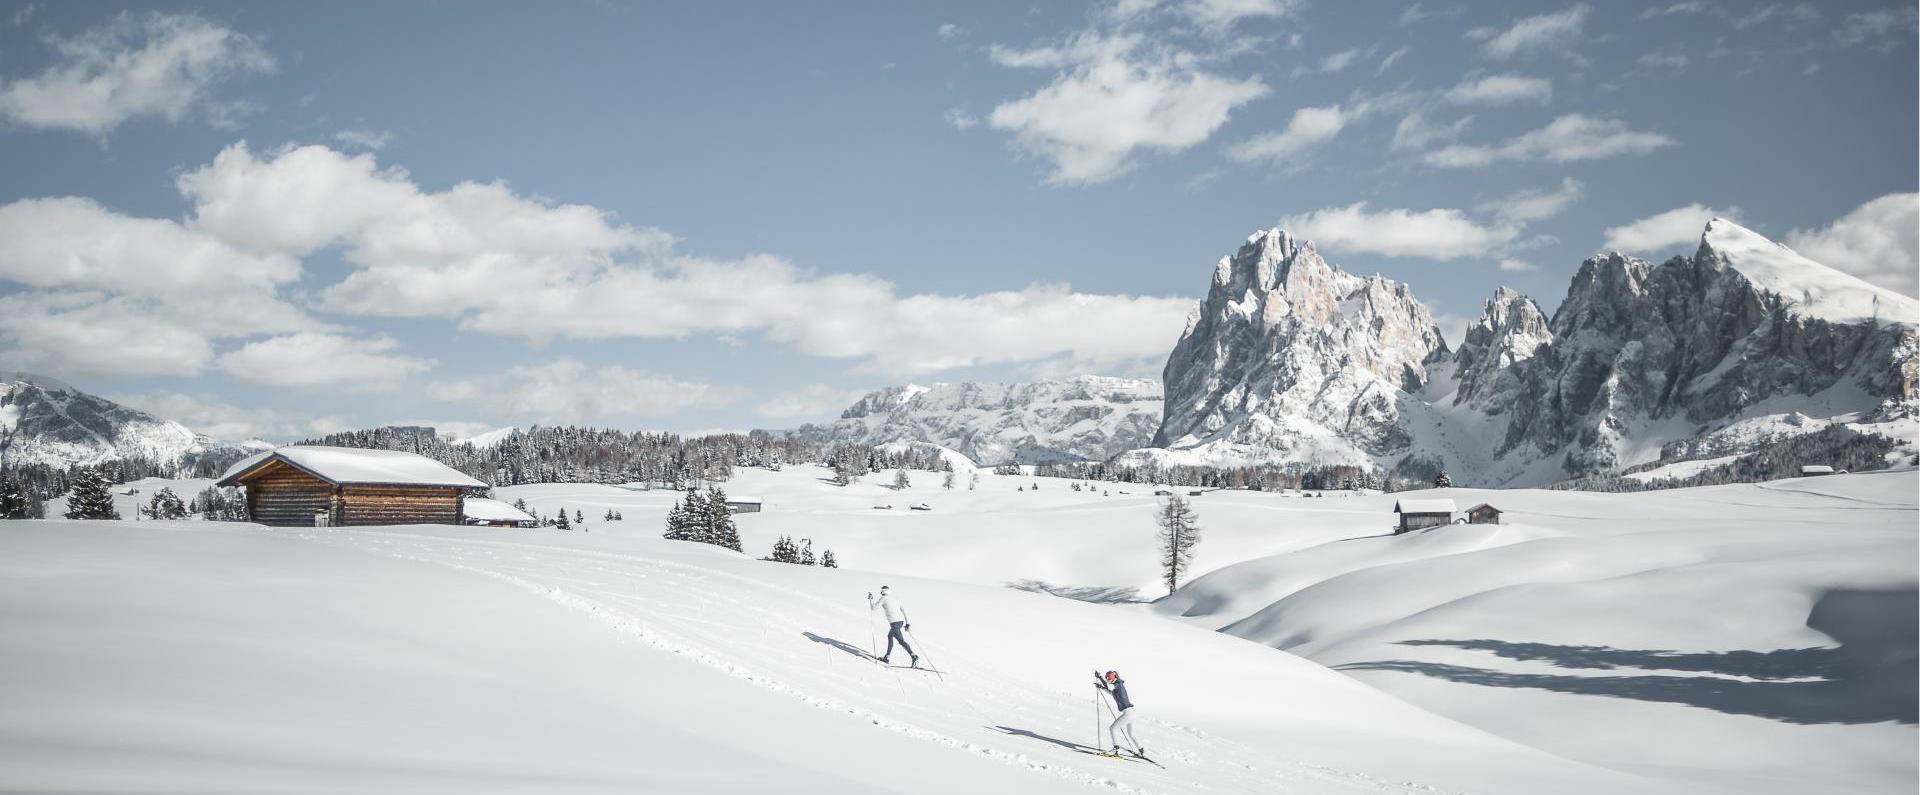 Winter cross-country skiing on the Seiser Alm with the Langkofel and Plattkofel in the background